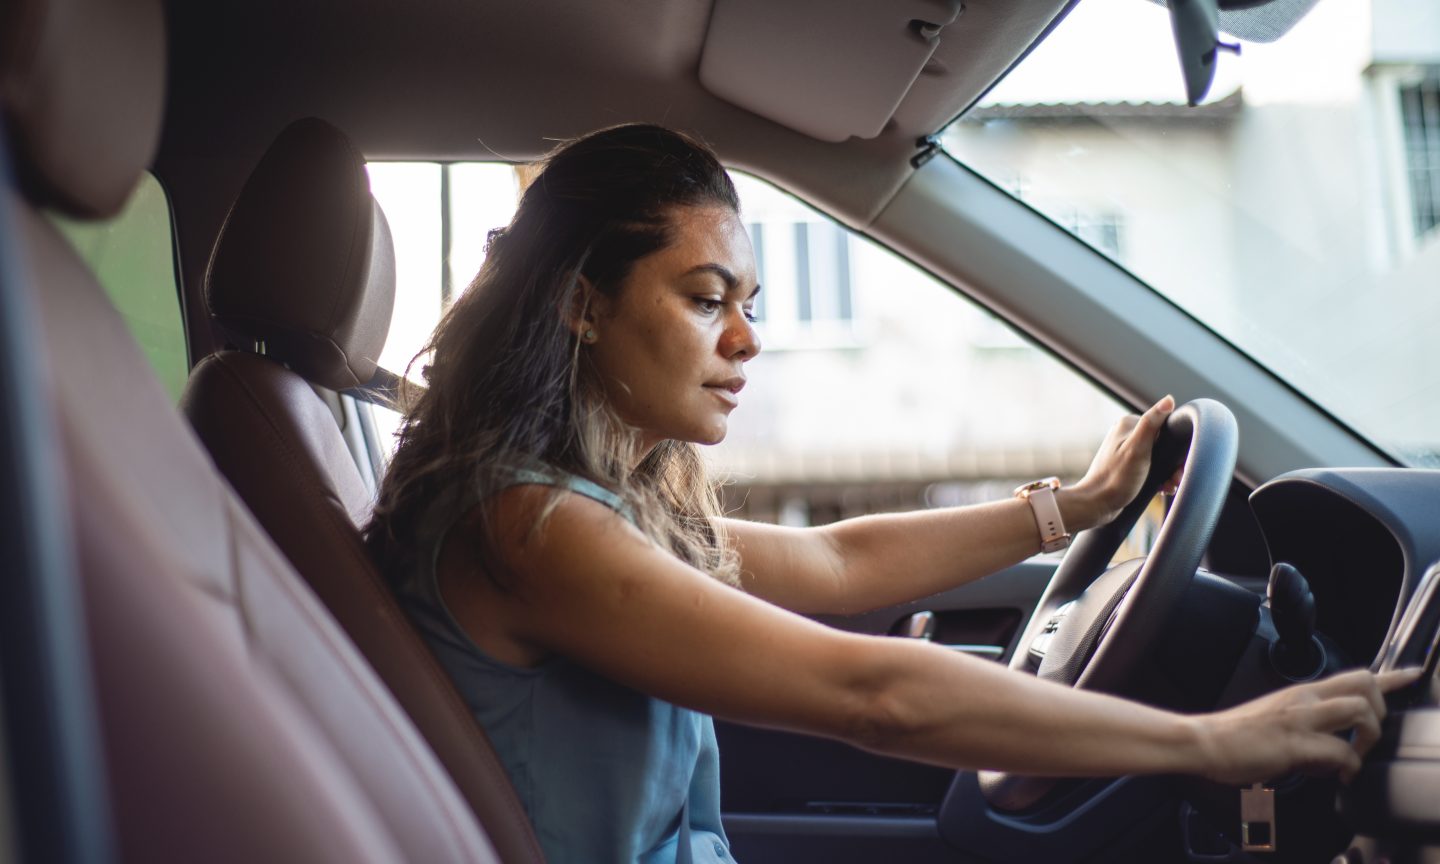 Chubb Auto Insurance Review 2022: Pros and Cons - NerdWallet